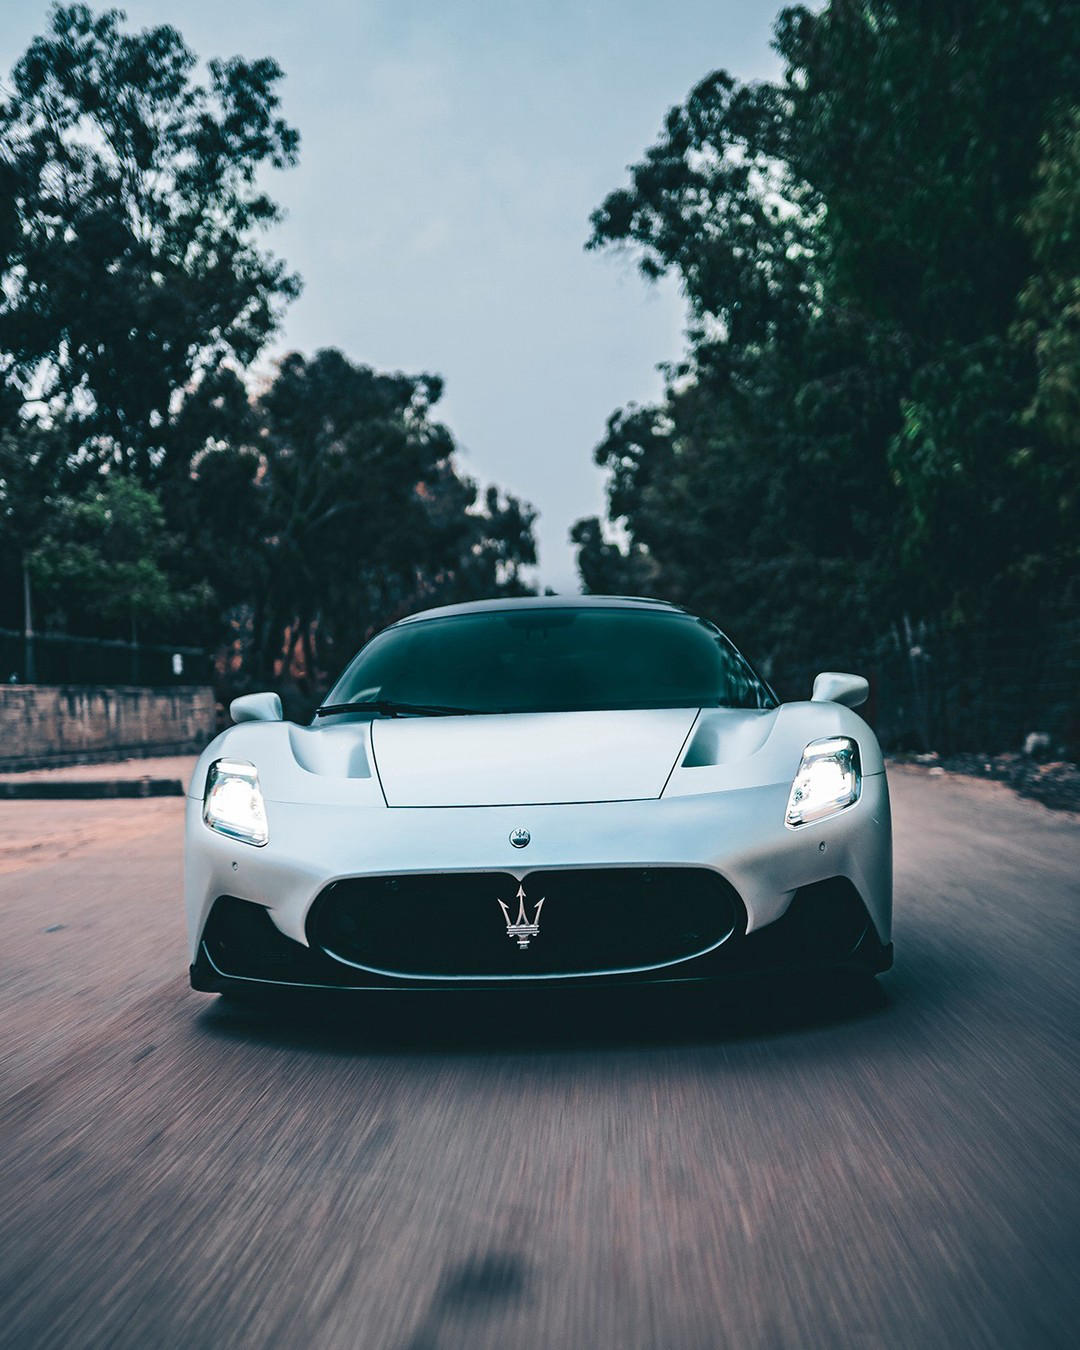 image  1 Maserati - Sometimes you only need an empty road and your #MaseratiMC20